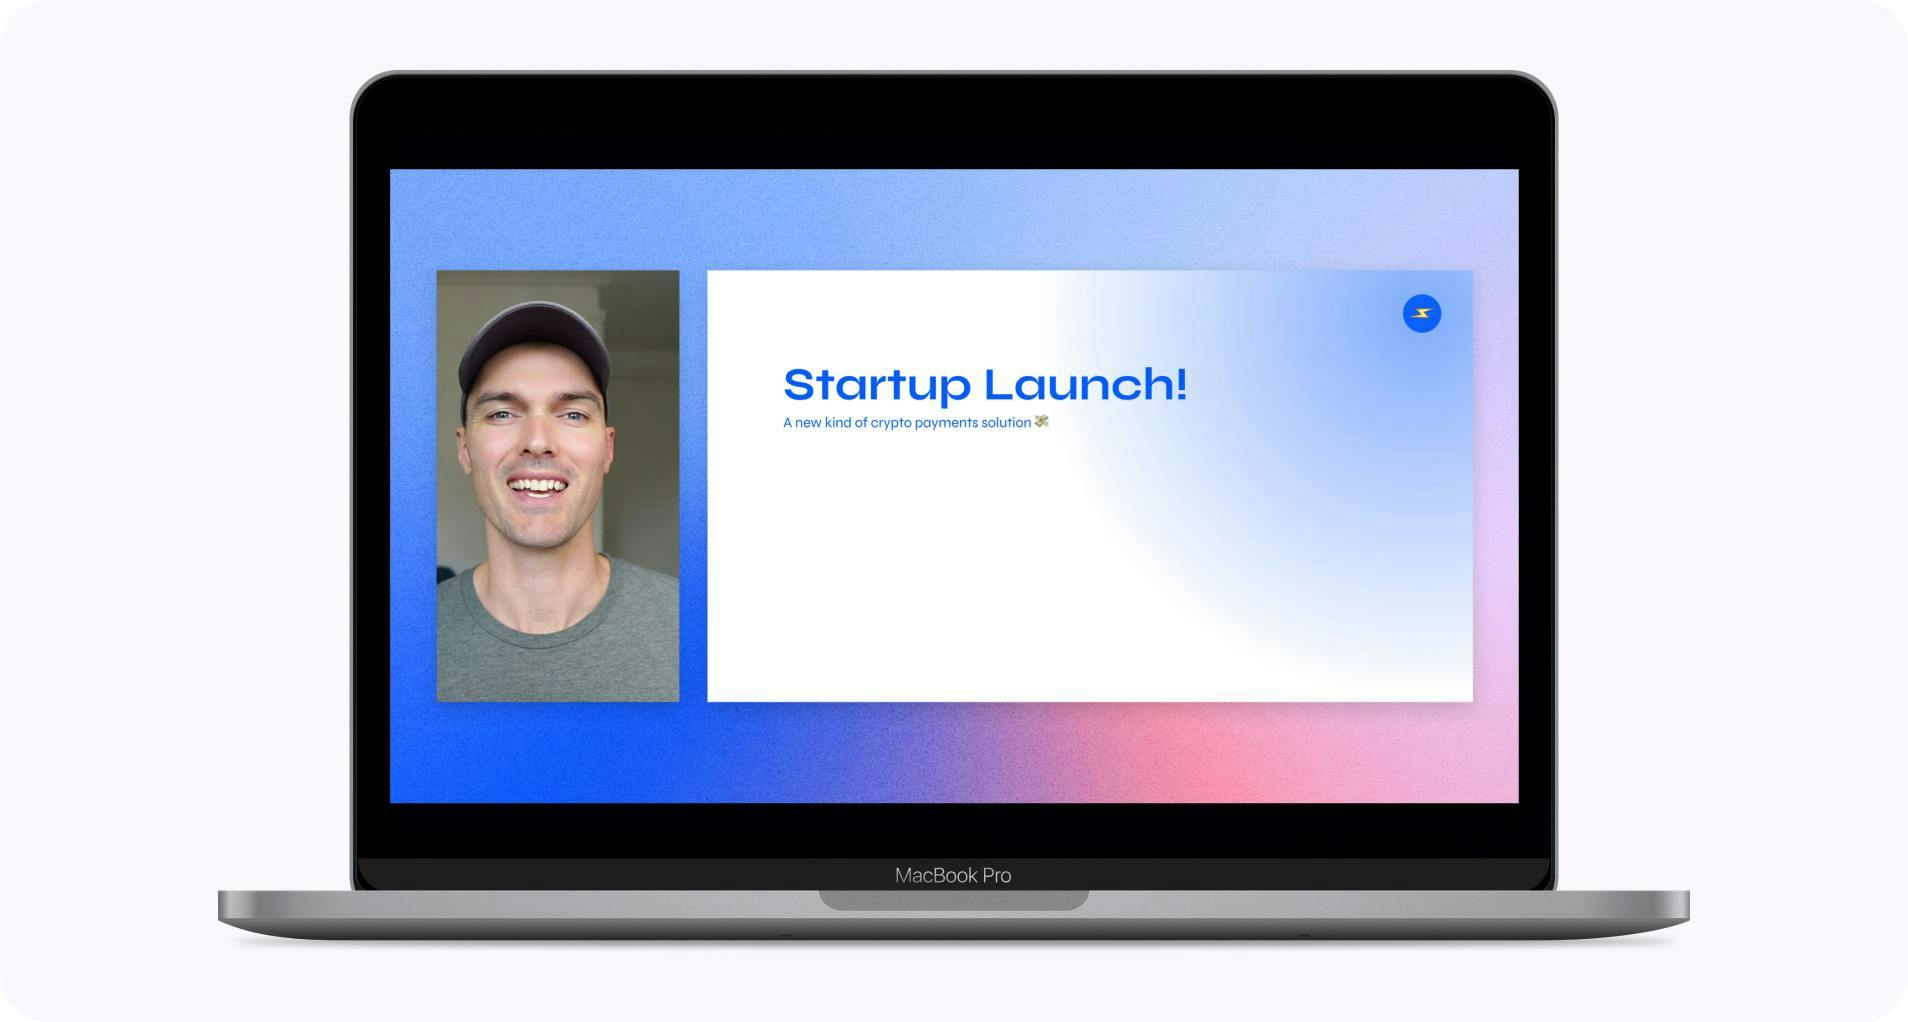 Create launch videos on Tella directly from your laptop.